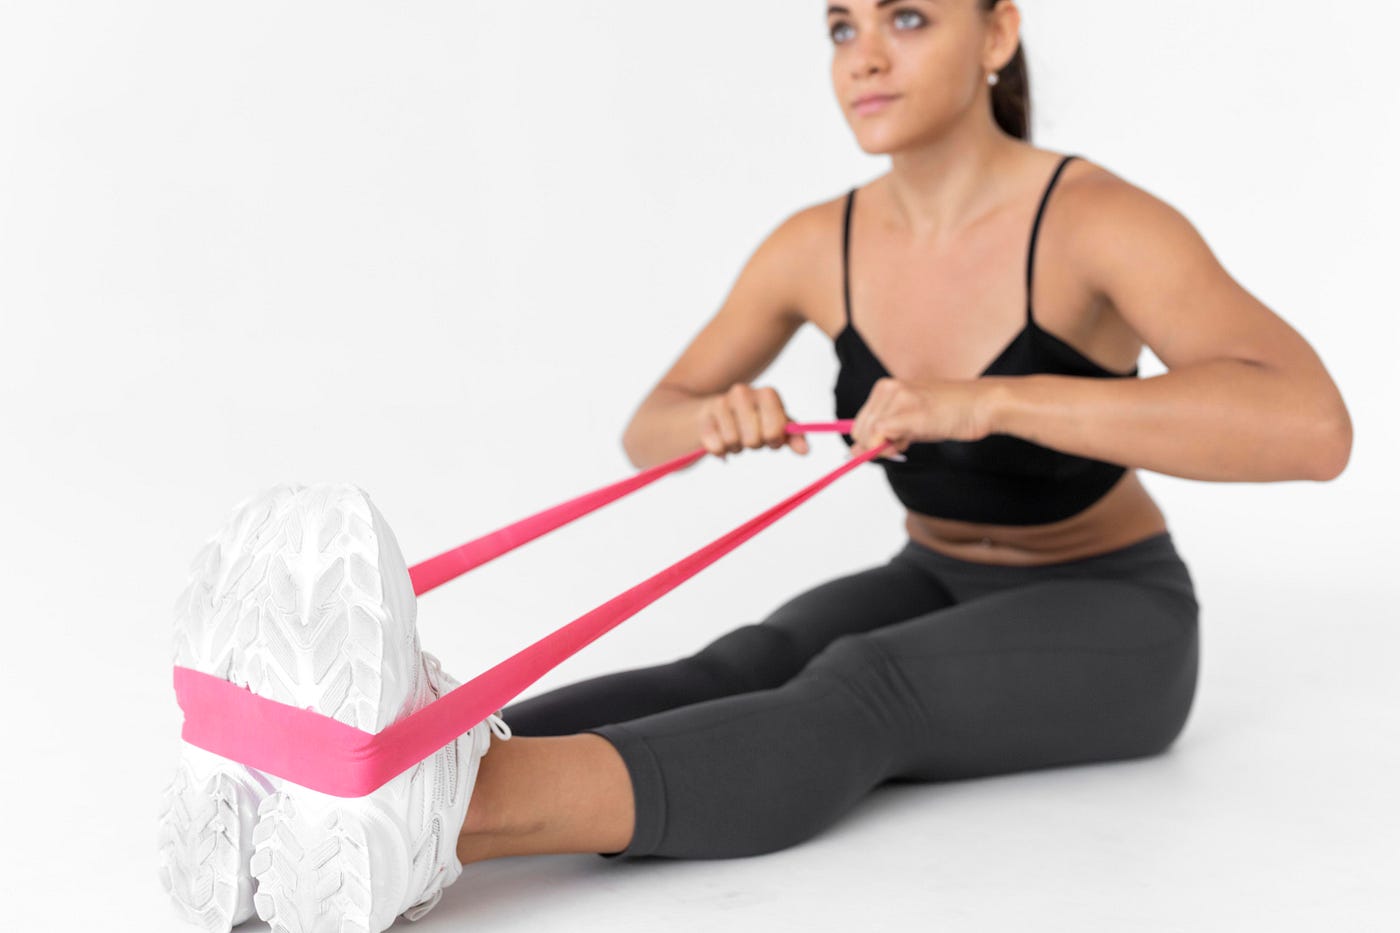 Resistance band exercises for legs while sitting